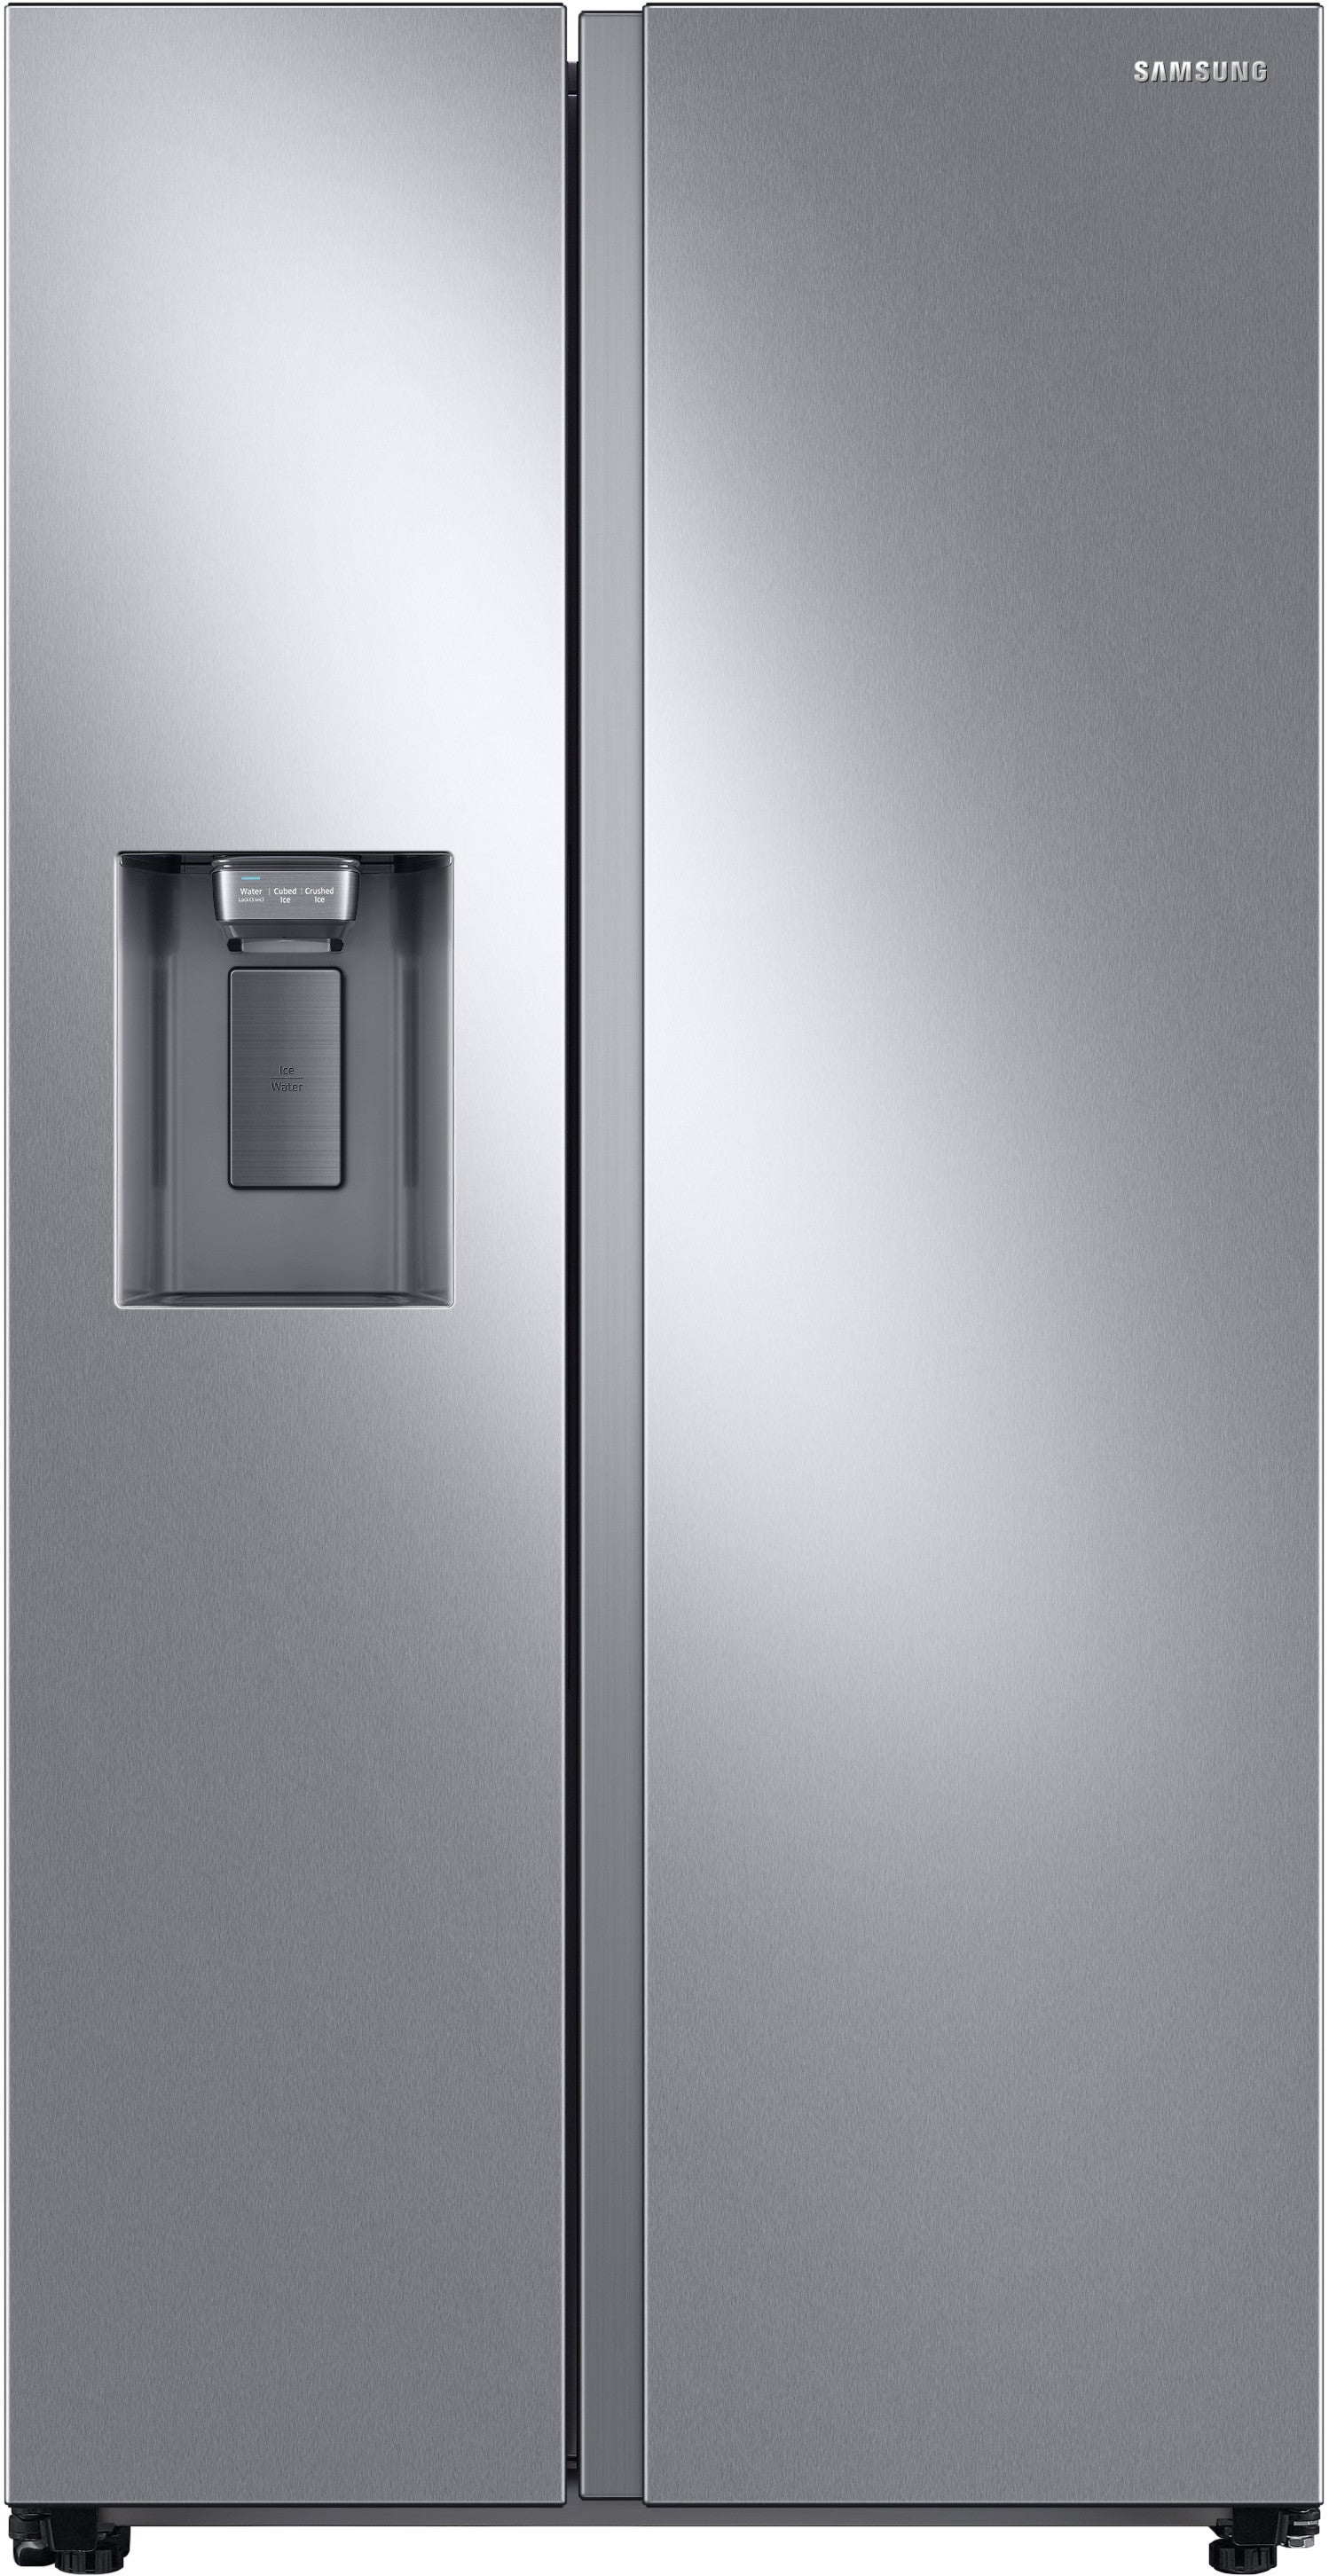 Samsung RS22T5201SR/AA 22-Cu Ft Counter-depth Side-by-side Refrigerator - Samsung Parts USA